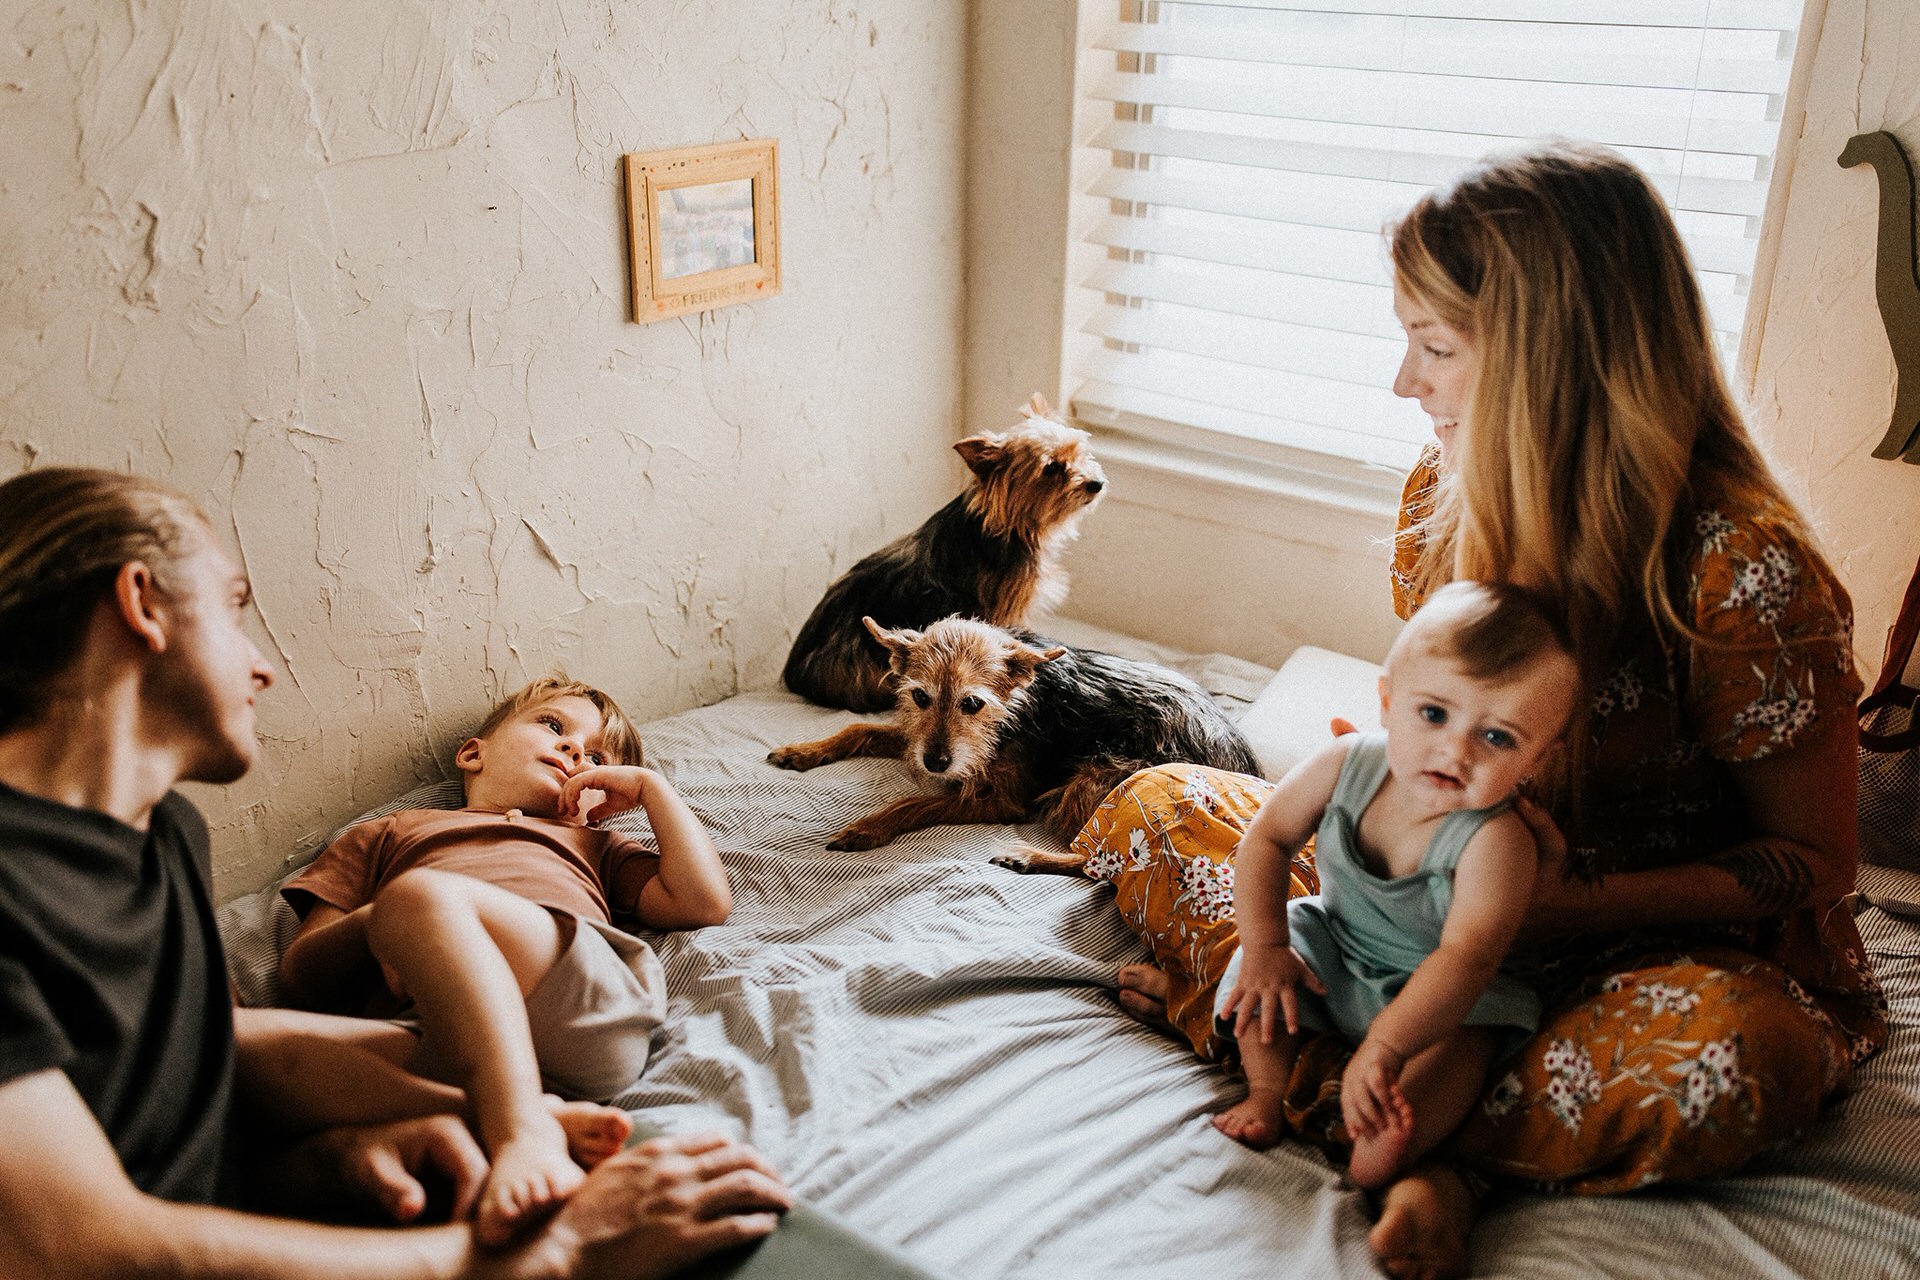 In a cozy bedroom in Portland, Oregon, a loving family gathers for a heartwarming fall photo. The bed is filled with the joyful presence of two children and their beloved dog.